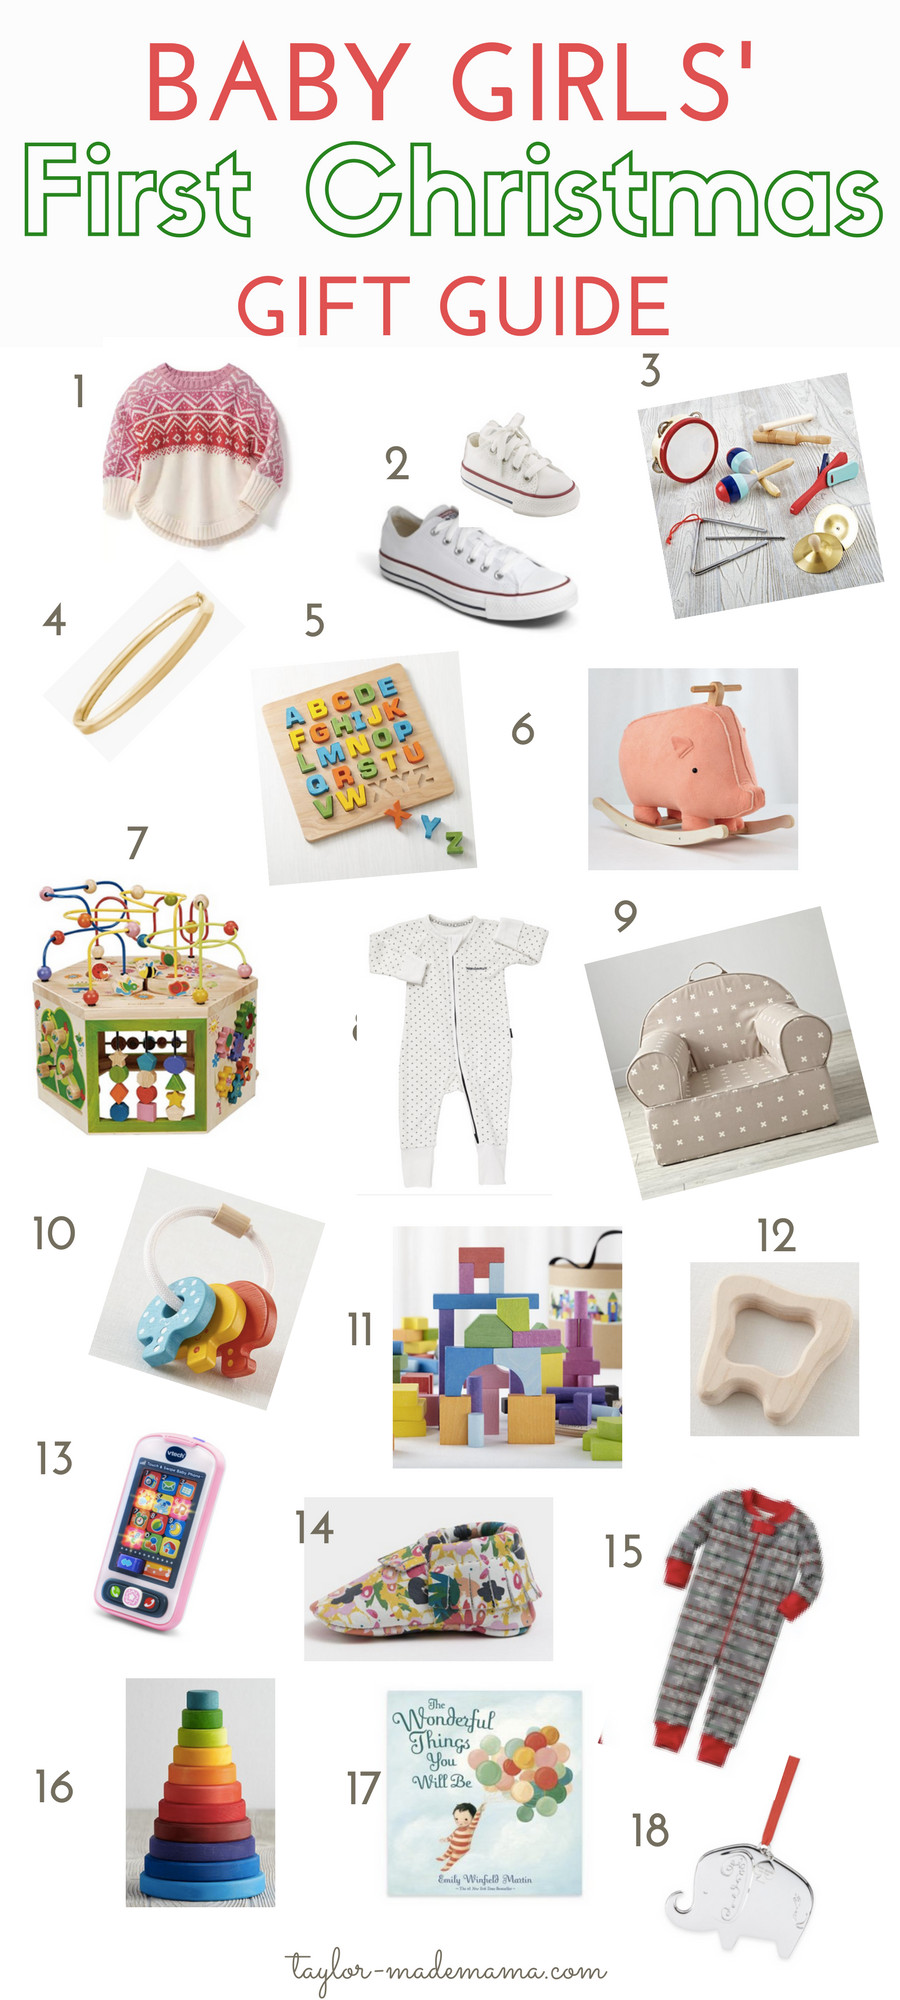 Christmas Gift Ideas For Baby Girl
 The Perfect First Christmas Gift Guide For A Baby Girl